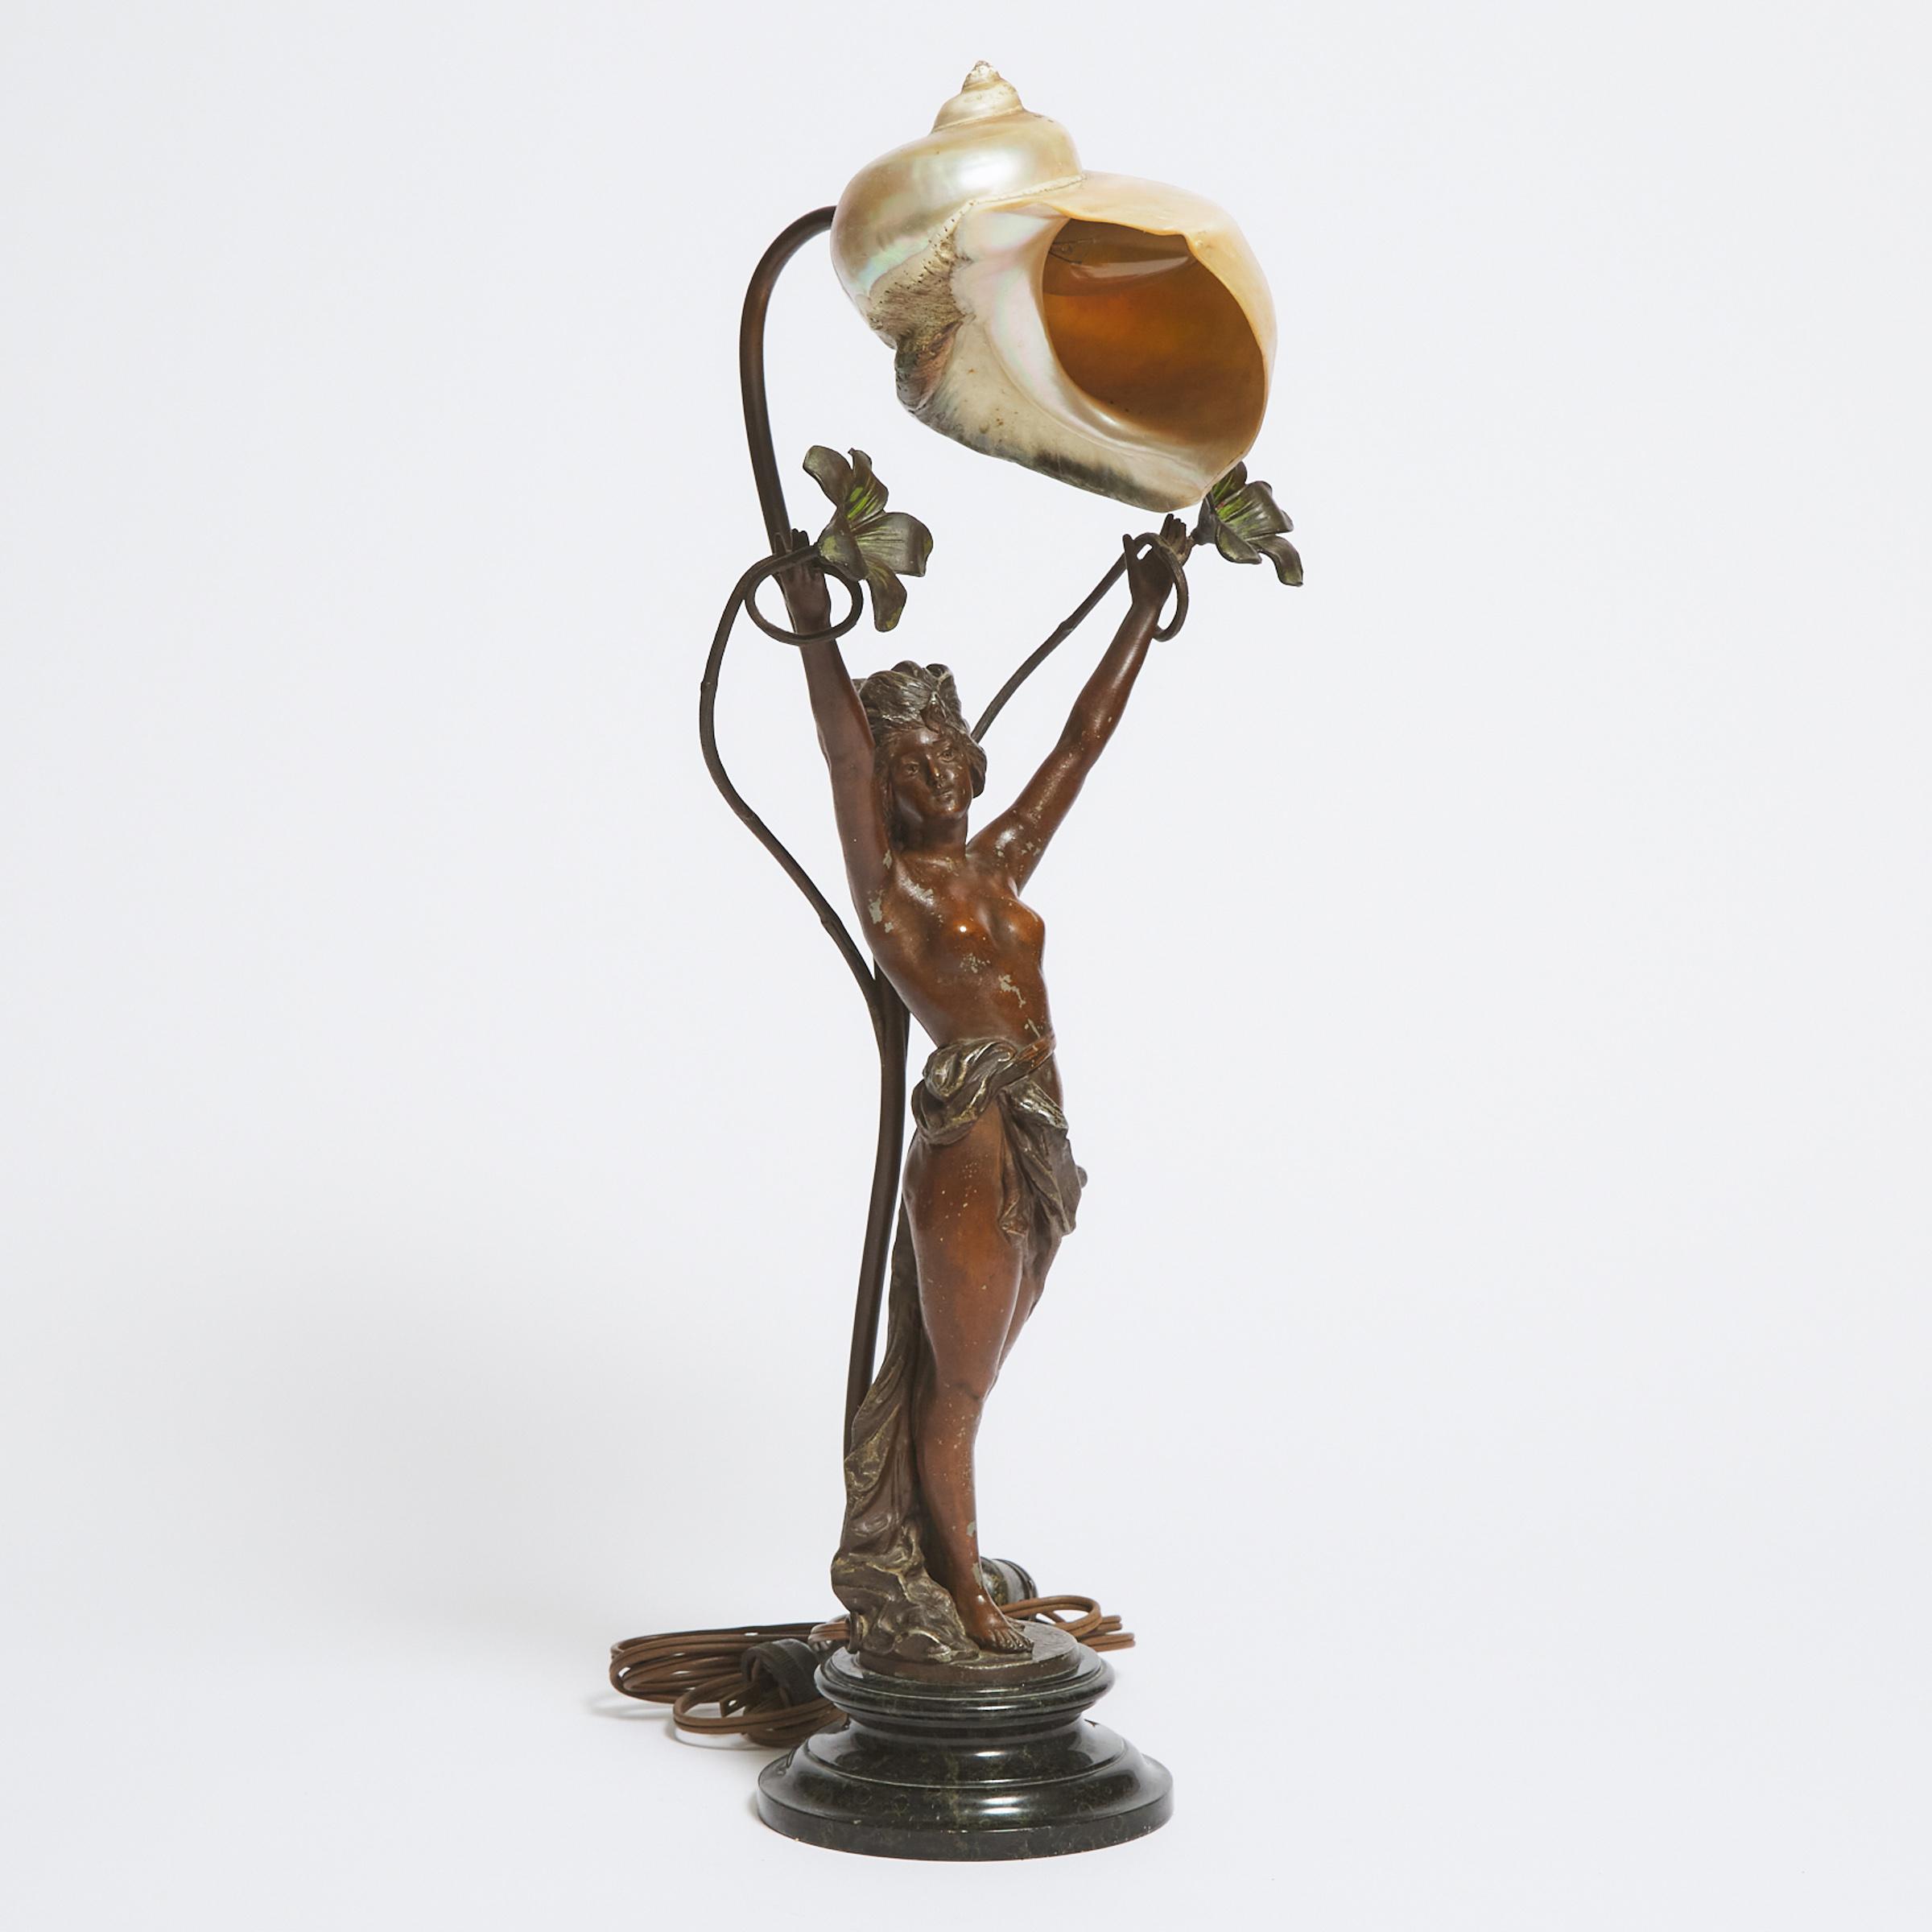 Art Nouveau Patinated Metal Figural Table Lamp with Natural Shell Shade, c.1900